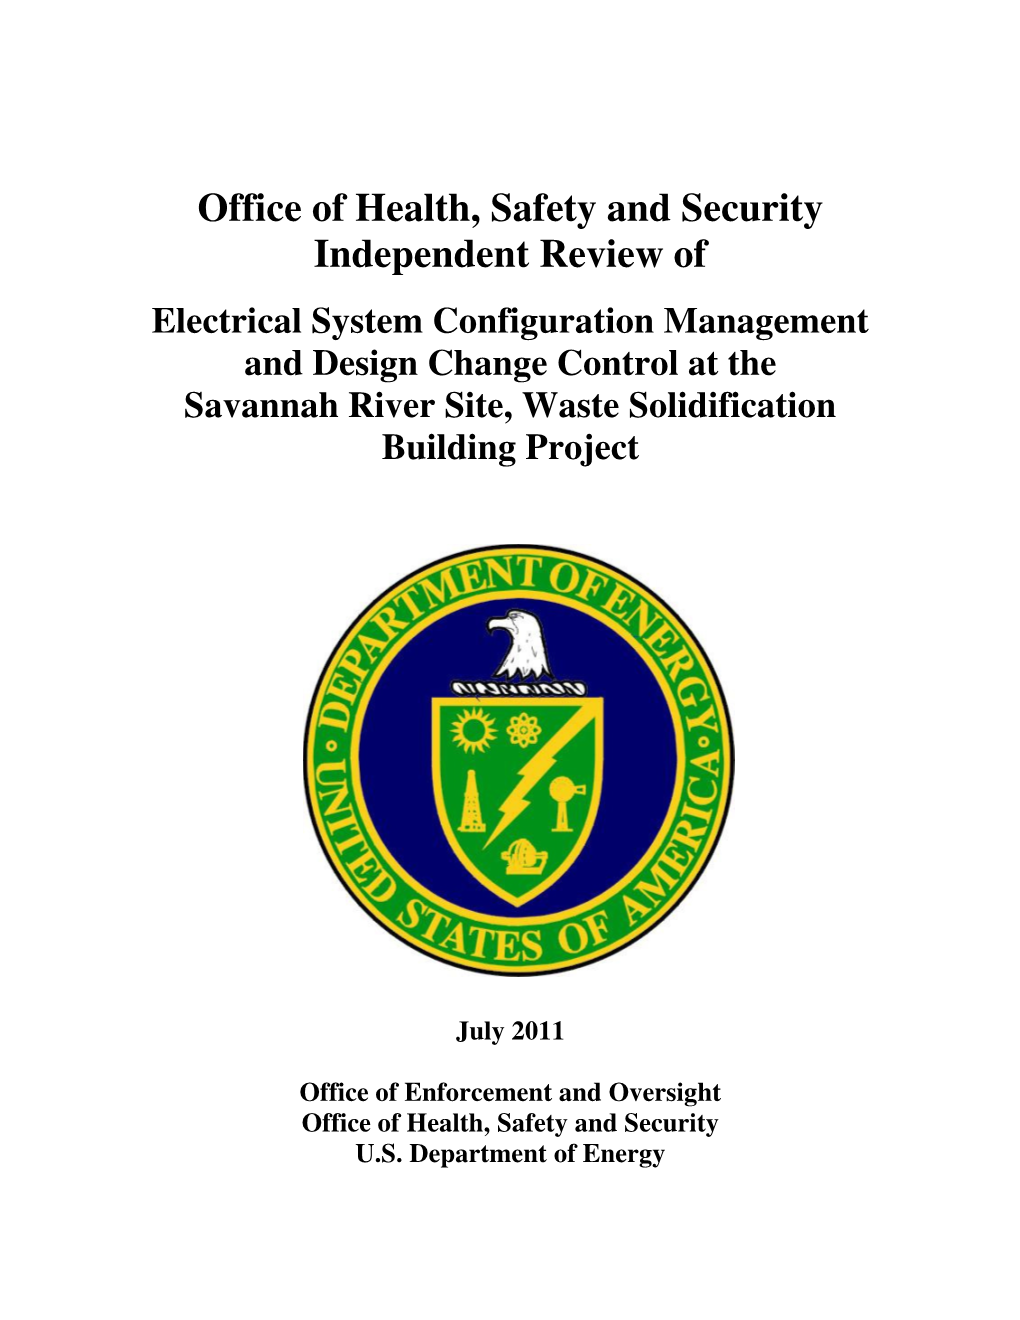 Electrical System Configuration Management and Design Change Control at the Savannah River Site, Waste Solidification Building Project